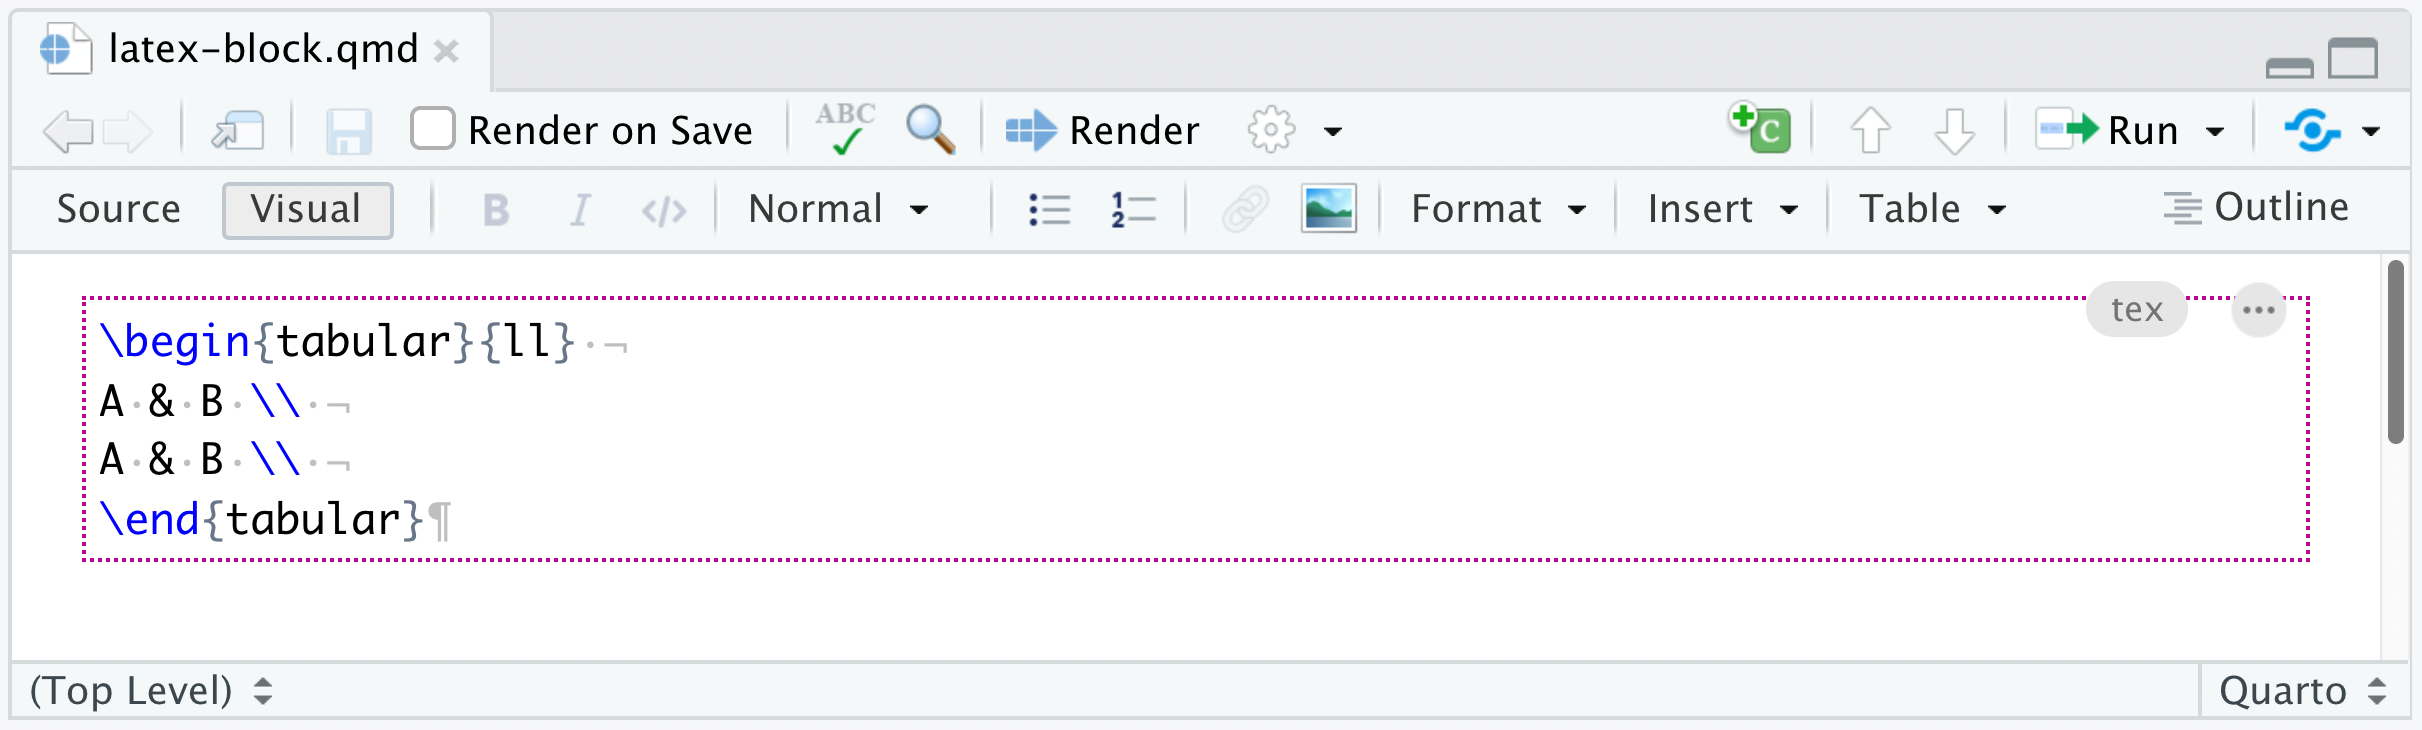 An R Markdown document opened in the R Studio visual editor. There is raw LaTeX describing a table surrounded by a pink rectangle. The rectangle runs the width of the page. At the top right of the pink rectangle is the label 'latex' and another button labeled by three dots. The 